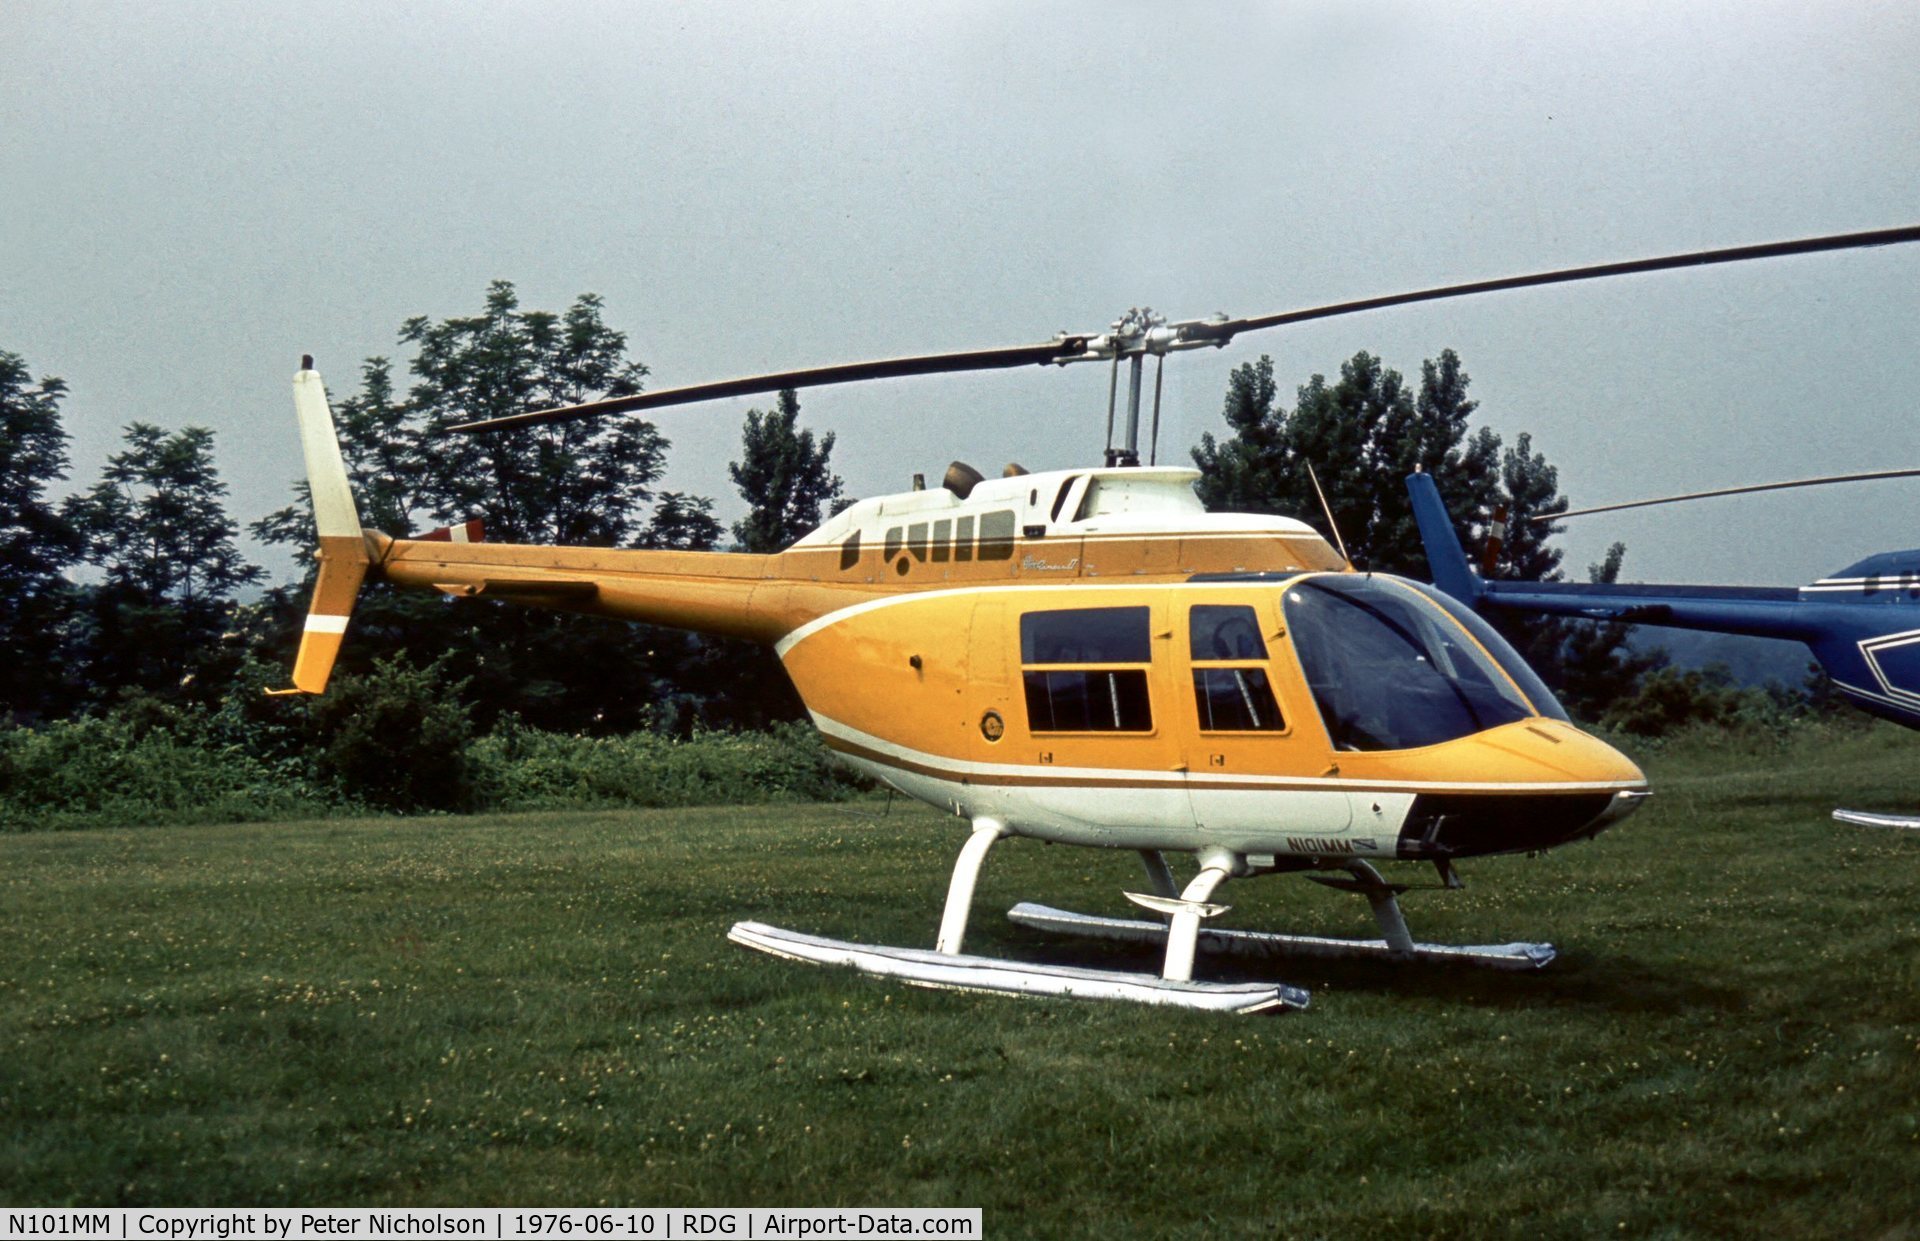 N101MM, Bell 206B JetRanger II C/N 1536, This Bell JetRanger II was present at the 1976 Reading Airshow.